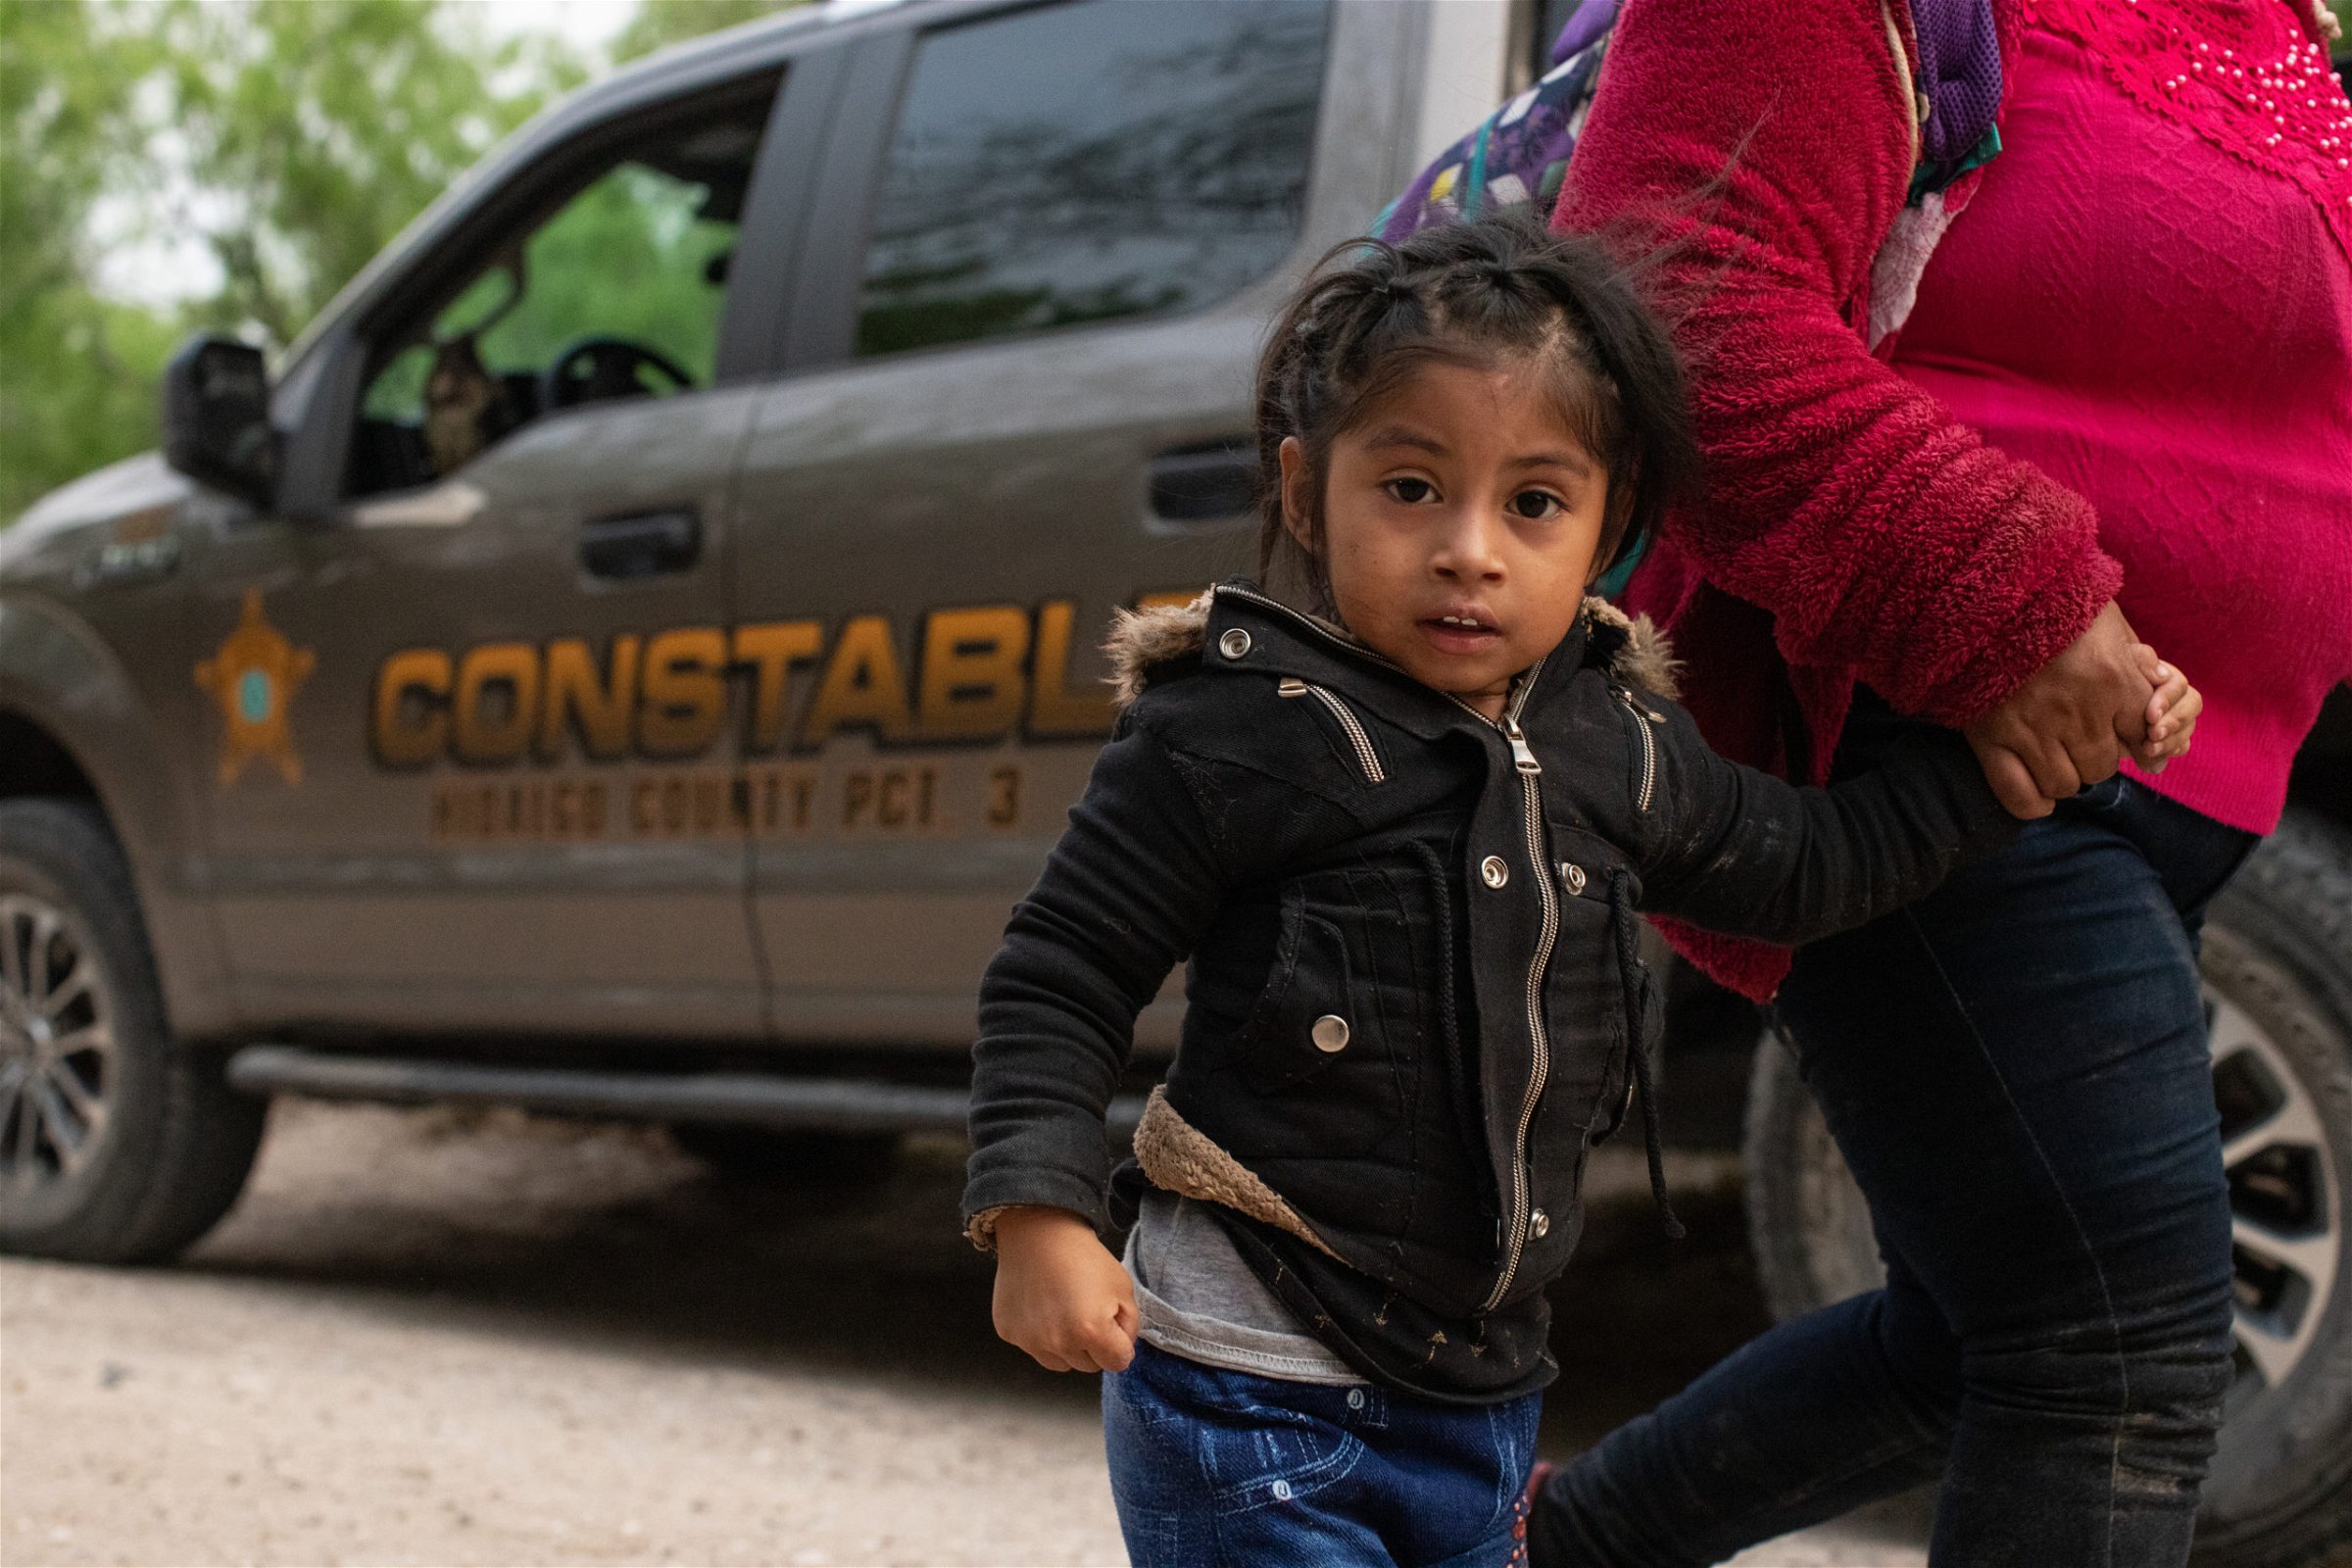 Illegal migrants make their way to a processing facility after they were smuggled into the U.S. and officials with the Hidalgo County Constable's office gathered biometrical data from them before releasing them in Rincon Village near McAllen, Texas, on March 24, 2021. (Kaylee Greenlee. - Daily Caller News Foundation)